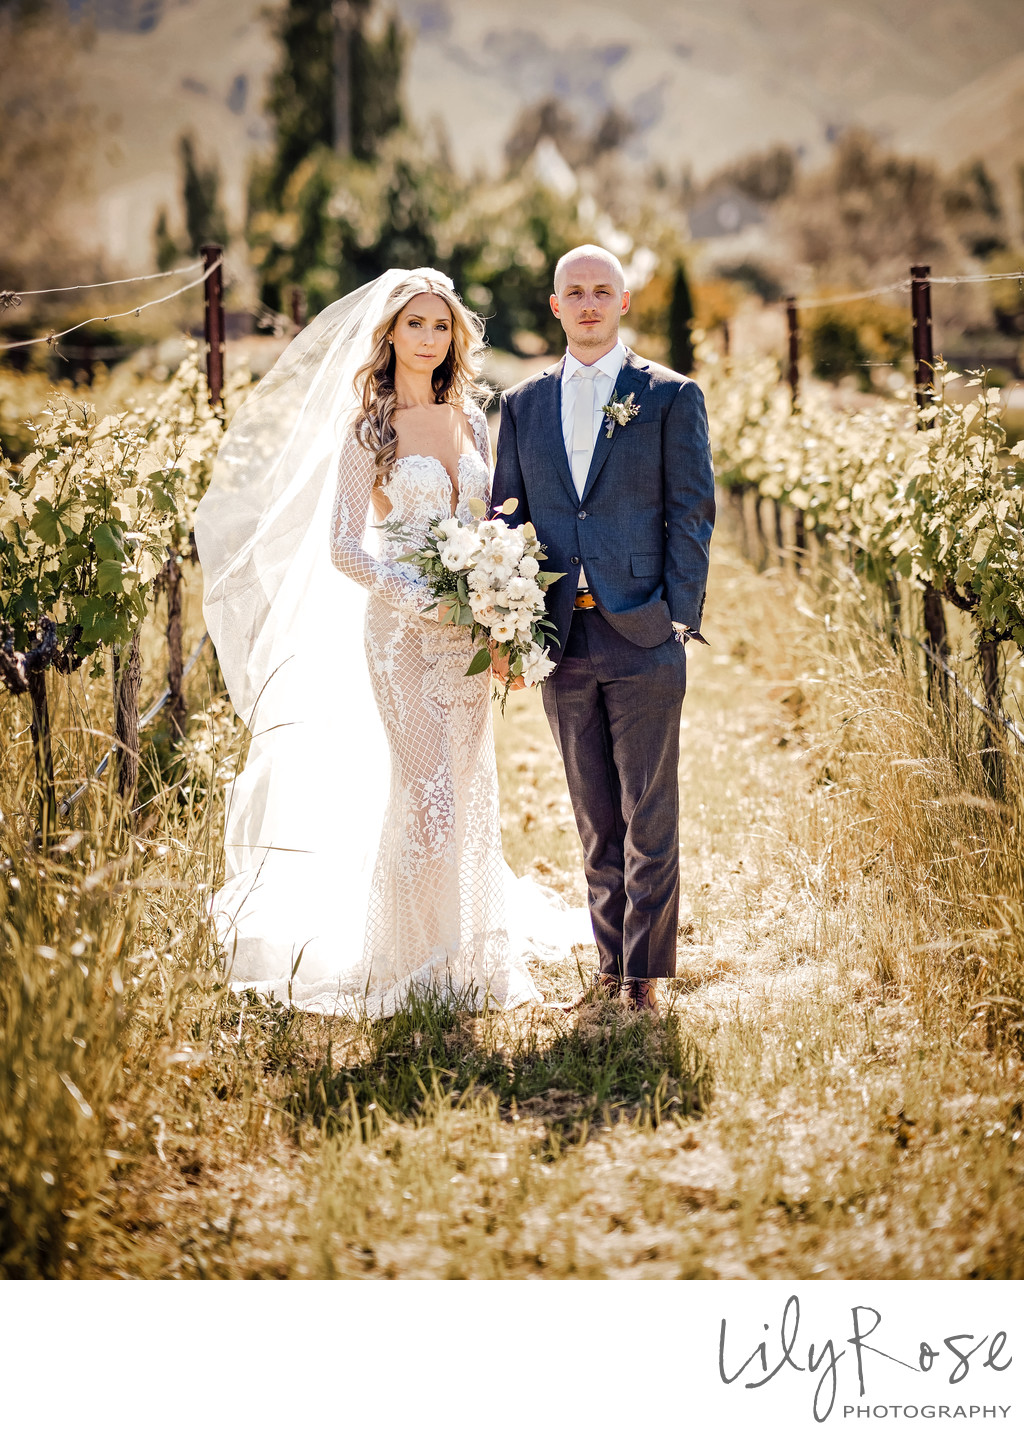 Chic Wedding Couple at The Barn at Tyge William Cellars